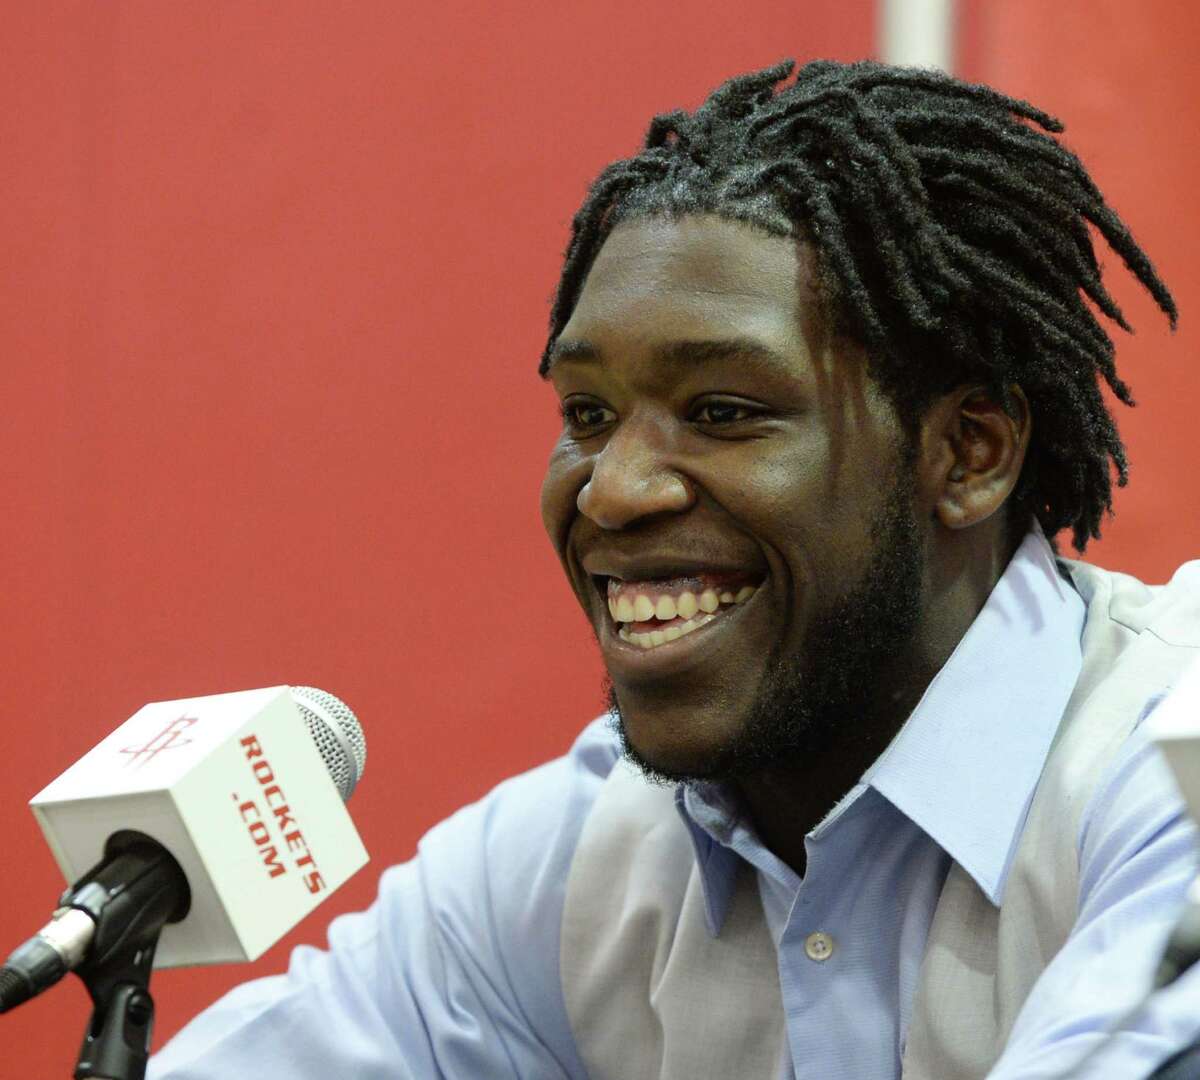 Montrezl Harrell was drafted out of Louisville, and the Rockets like the defensive foundation the forward built with the Cardinals.